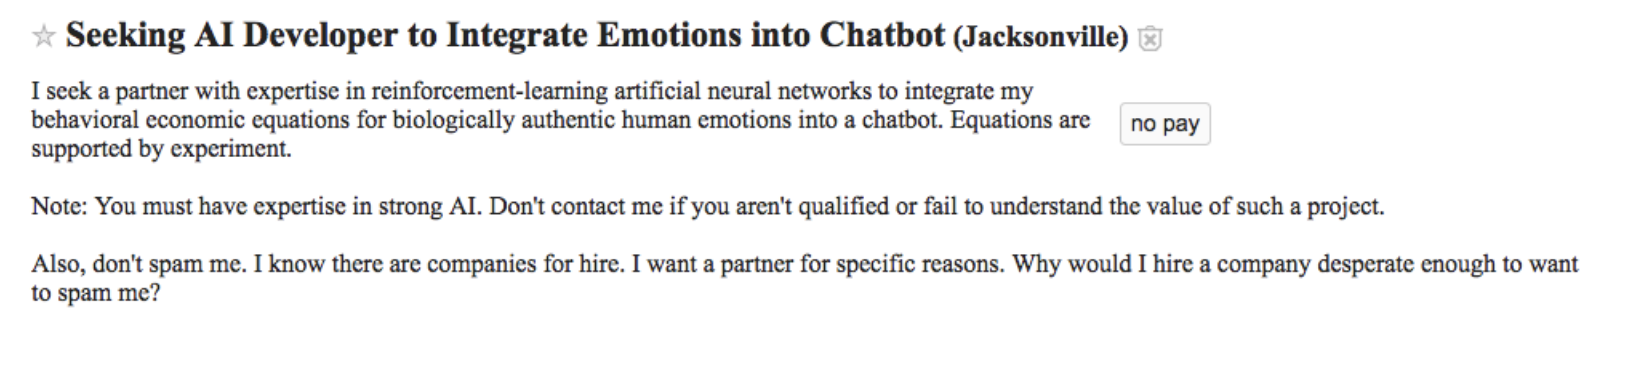 Job ad seeking AI developer to incorporate emotions into chatbot, stressing expertise in AI and neural networks, no pay offered